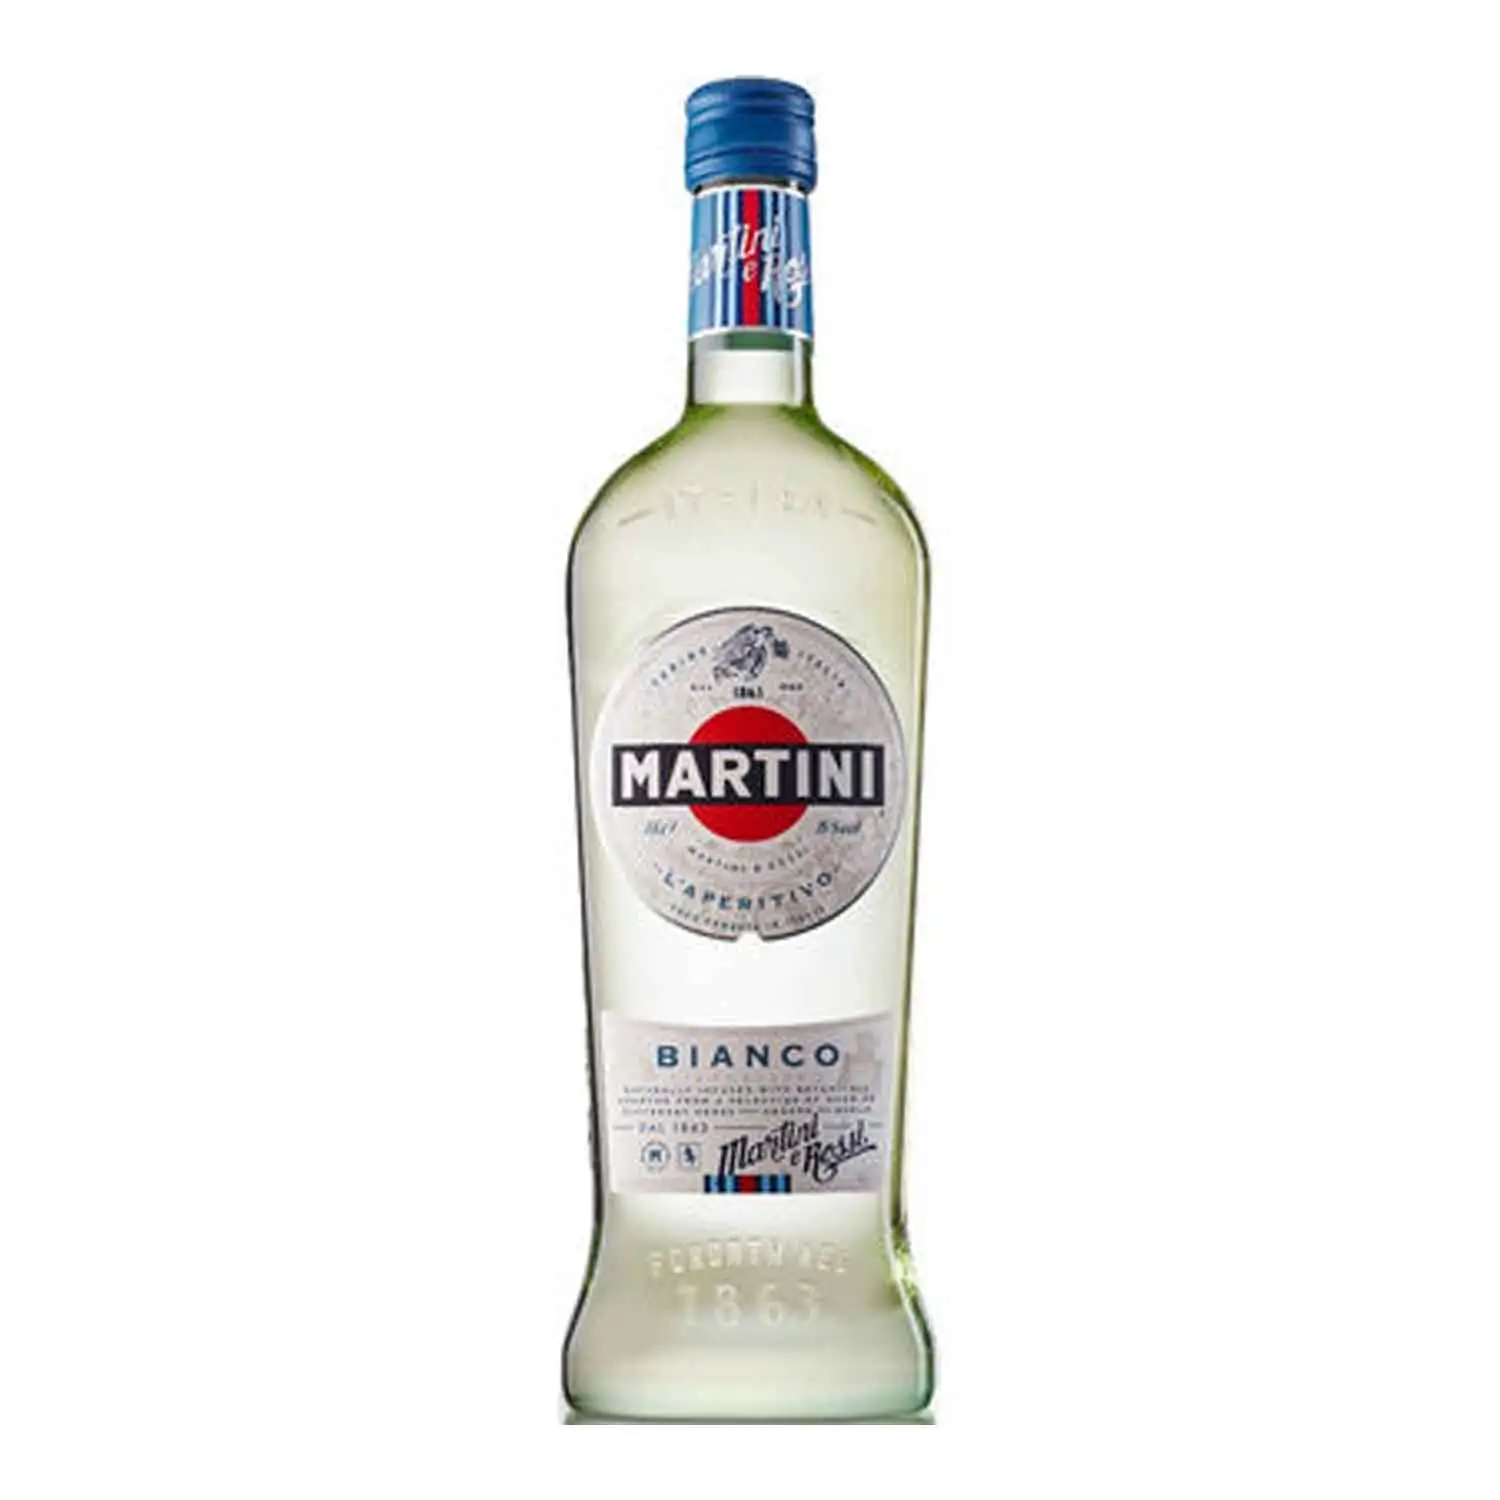 Martini bianco 75cl Alc 15% - Buy at Real Tobacco